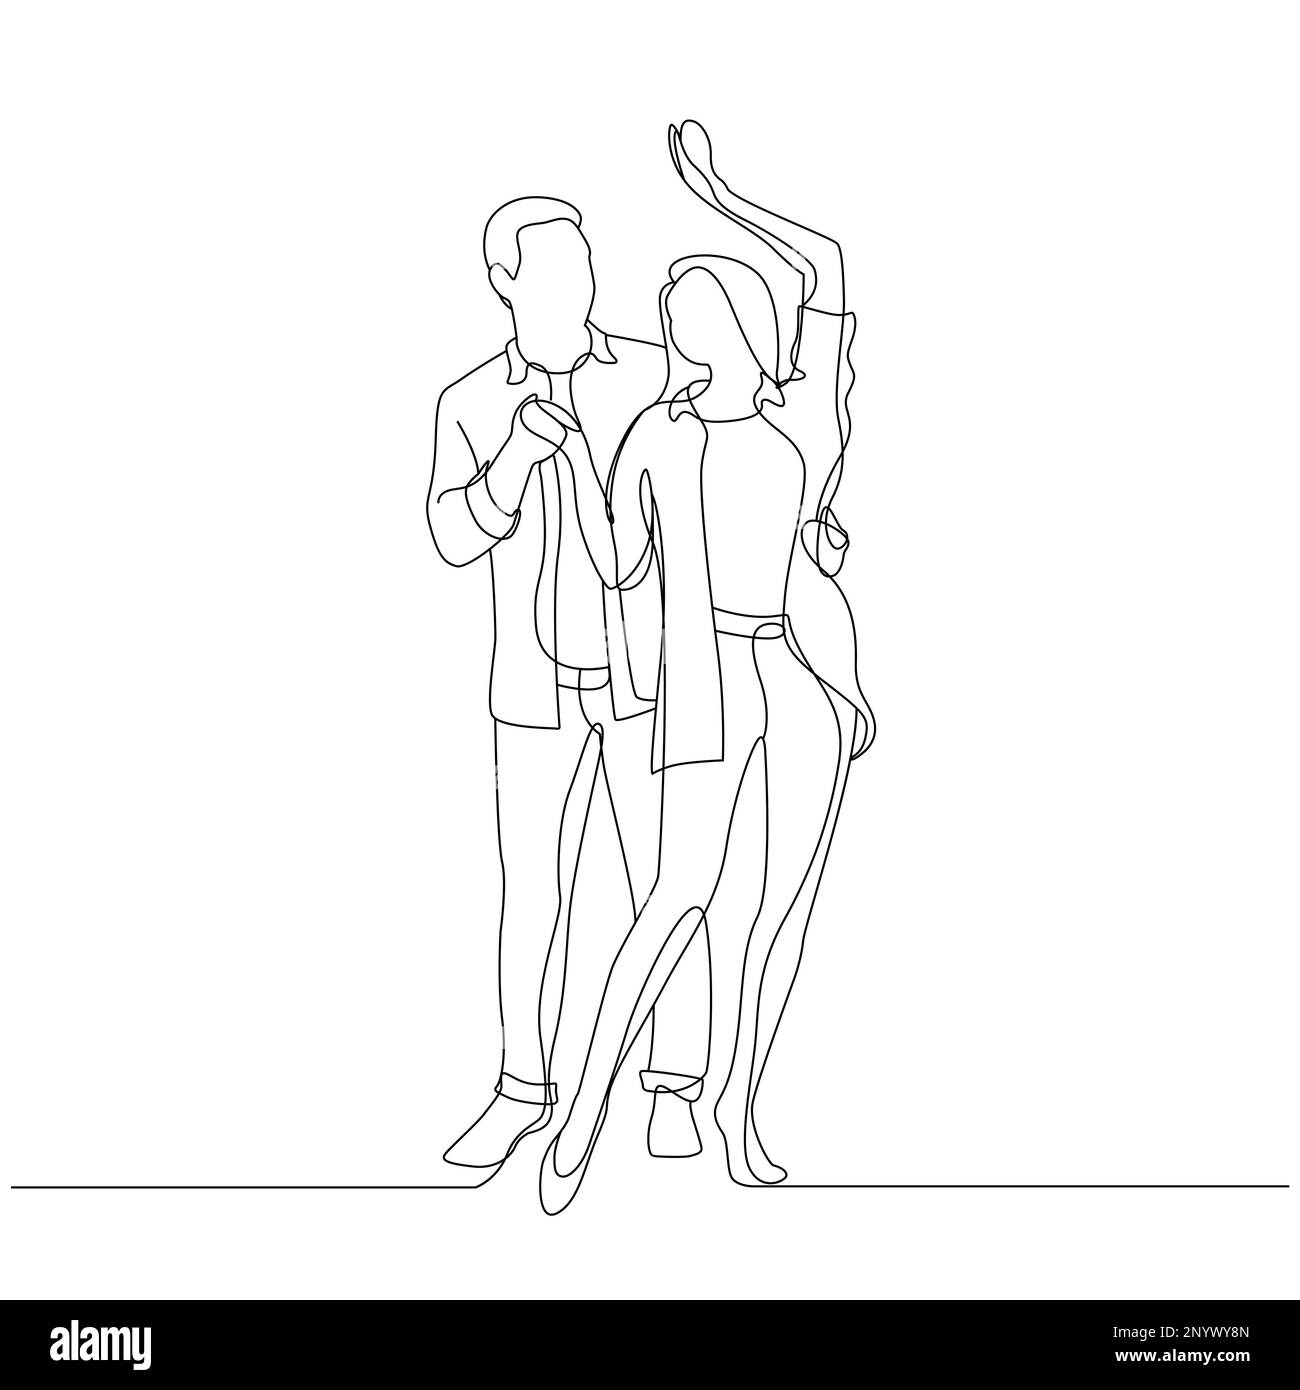 Couple dancing, outline on white background. Vector illustration Stock Photo